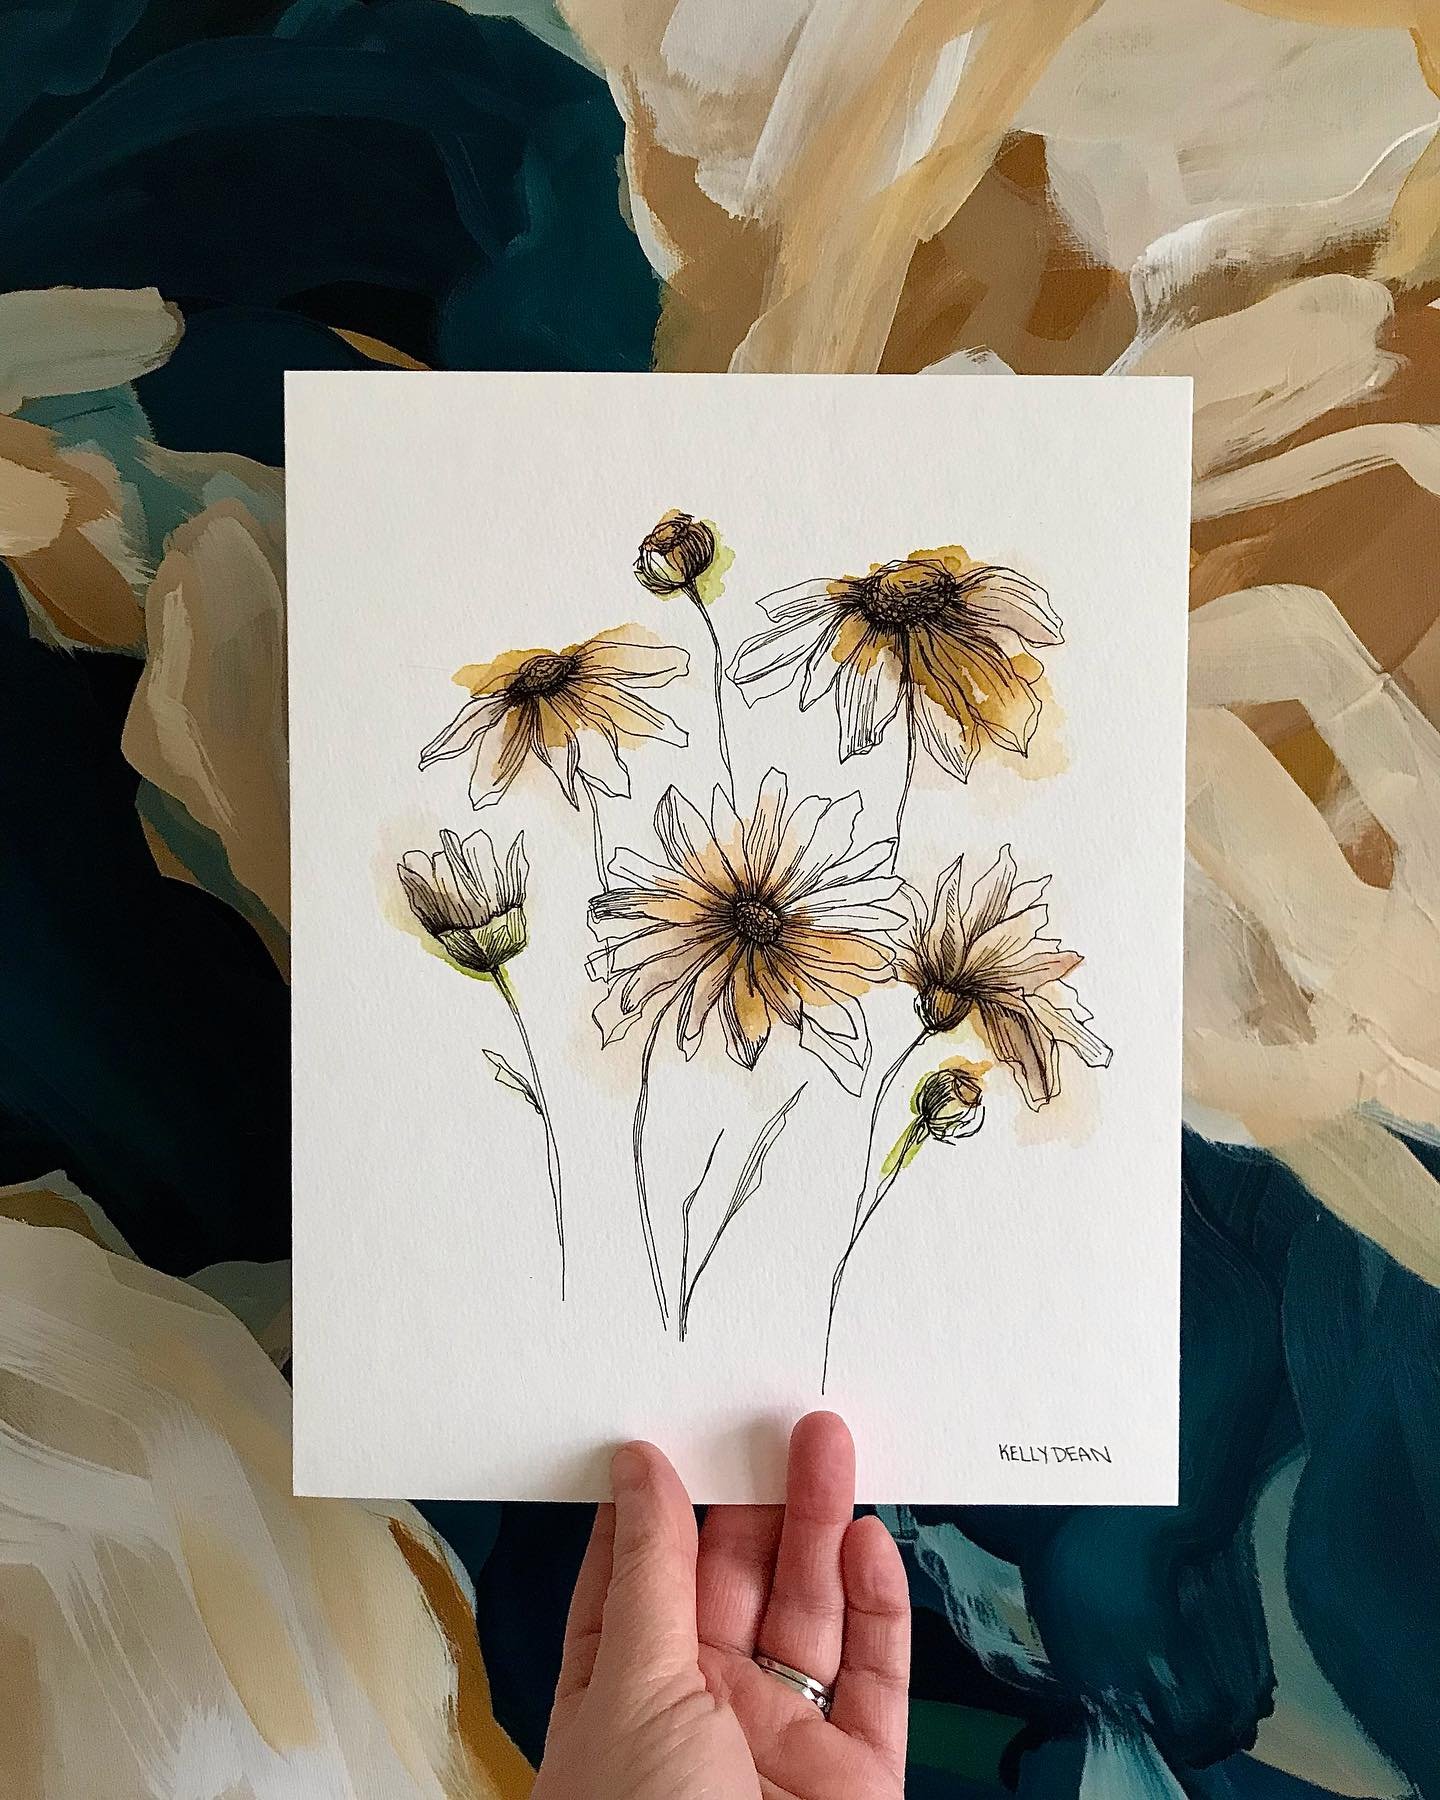 Next up in my monthly botanic study, an end of April floral&hellip;

Daisies!

This 8&rdquo;x10&rdquo; watercolour and pen original will be available on my website tomorrow April 30th.